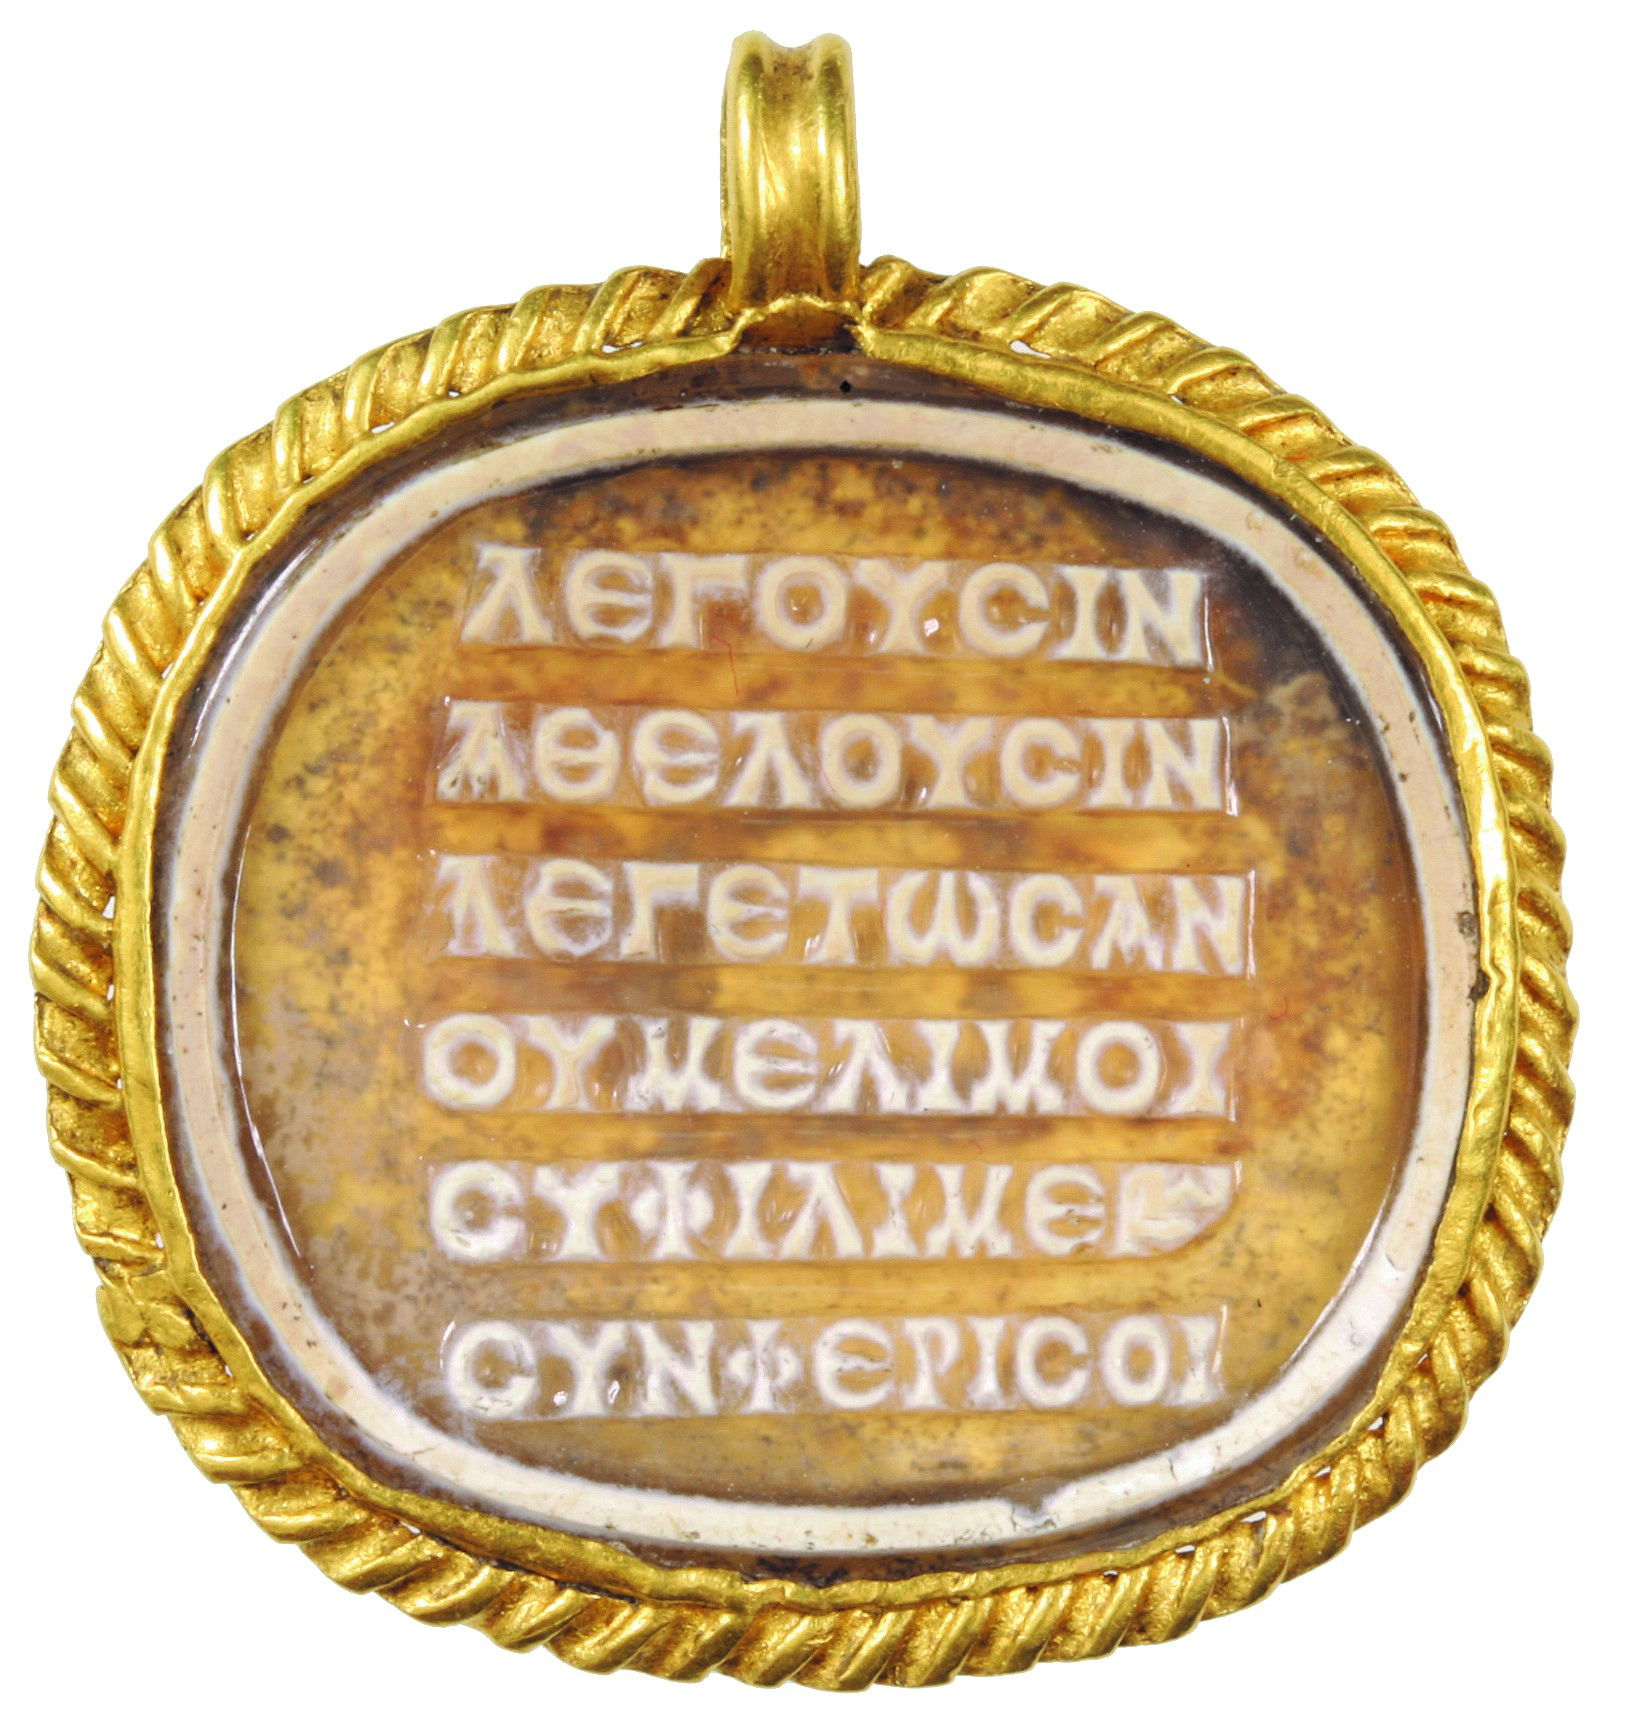 The poem inscribed on a cameo on a medallion of glass paste (2nd to 3rd century CE) found in a sarcophagus around the neck of a deceased young woman in what is now Hungary. Image courtesy: BHM Aquincum Museum and Archaeological Park / Péter Komjáthy